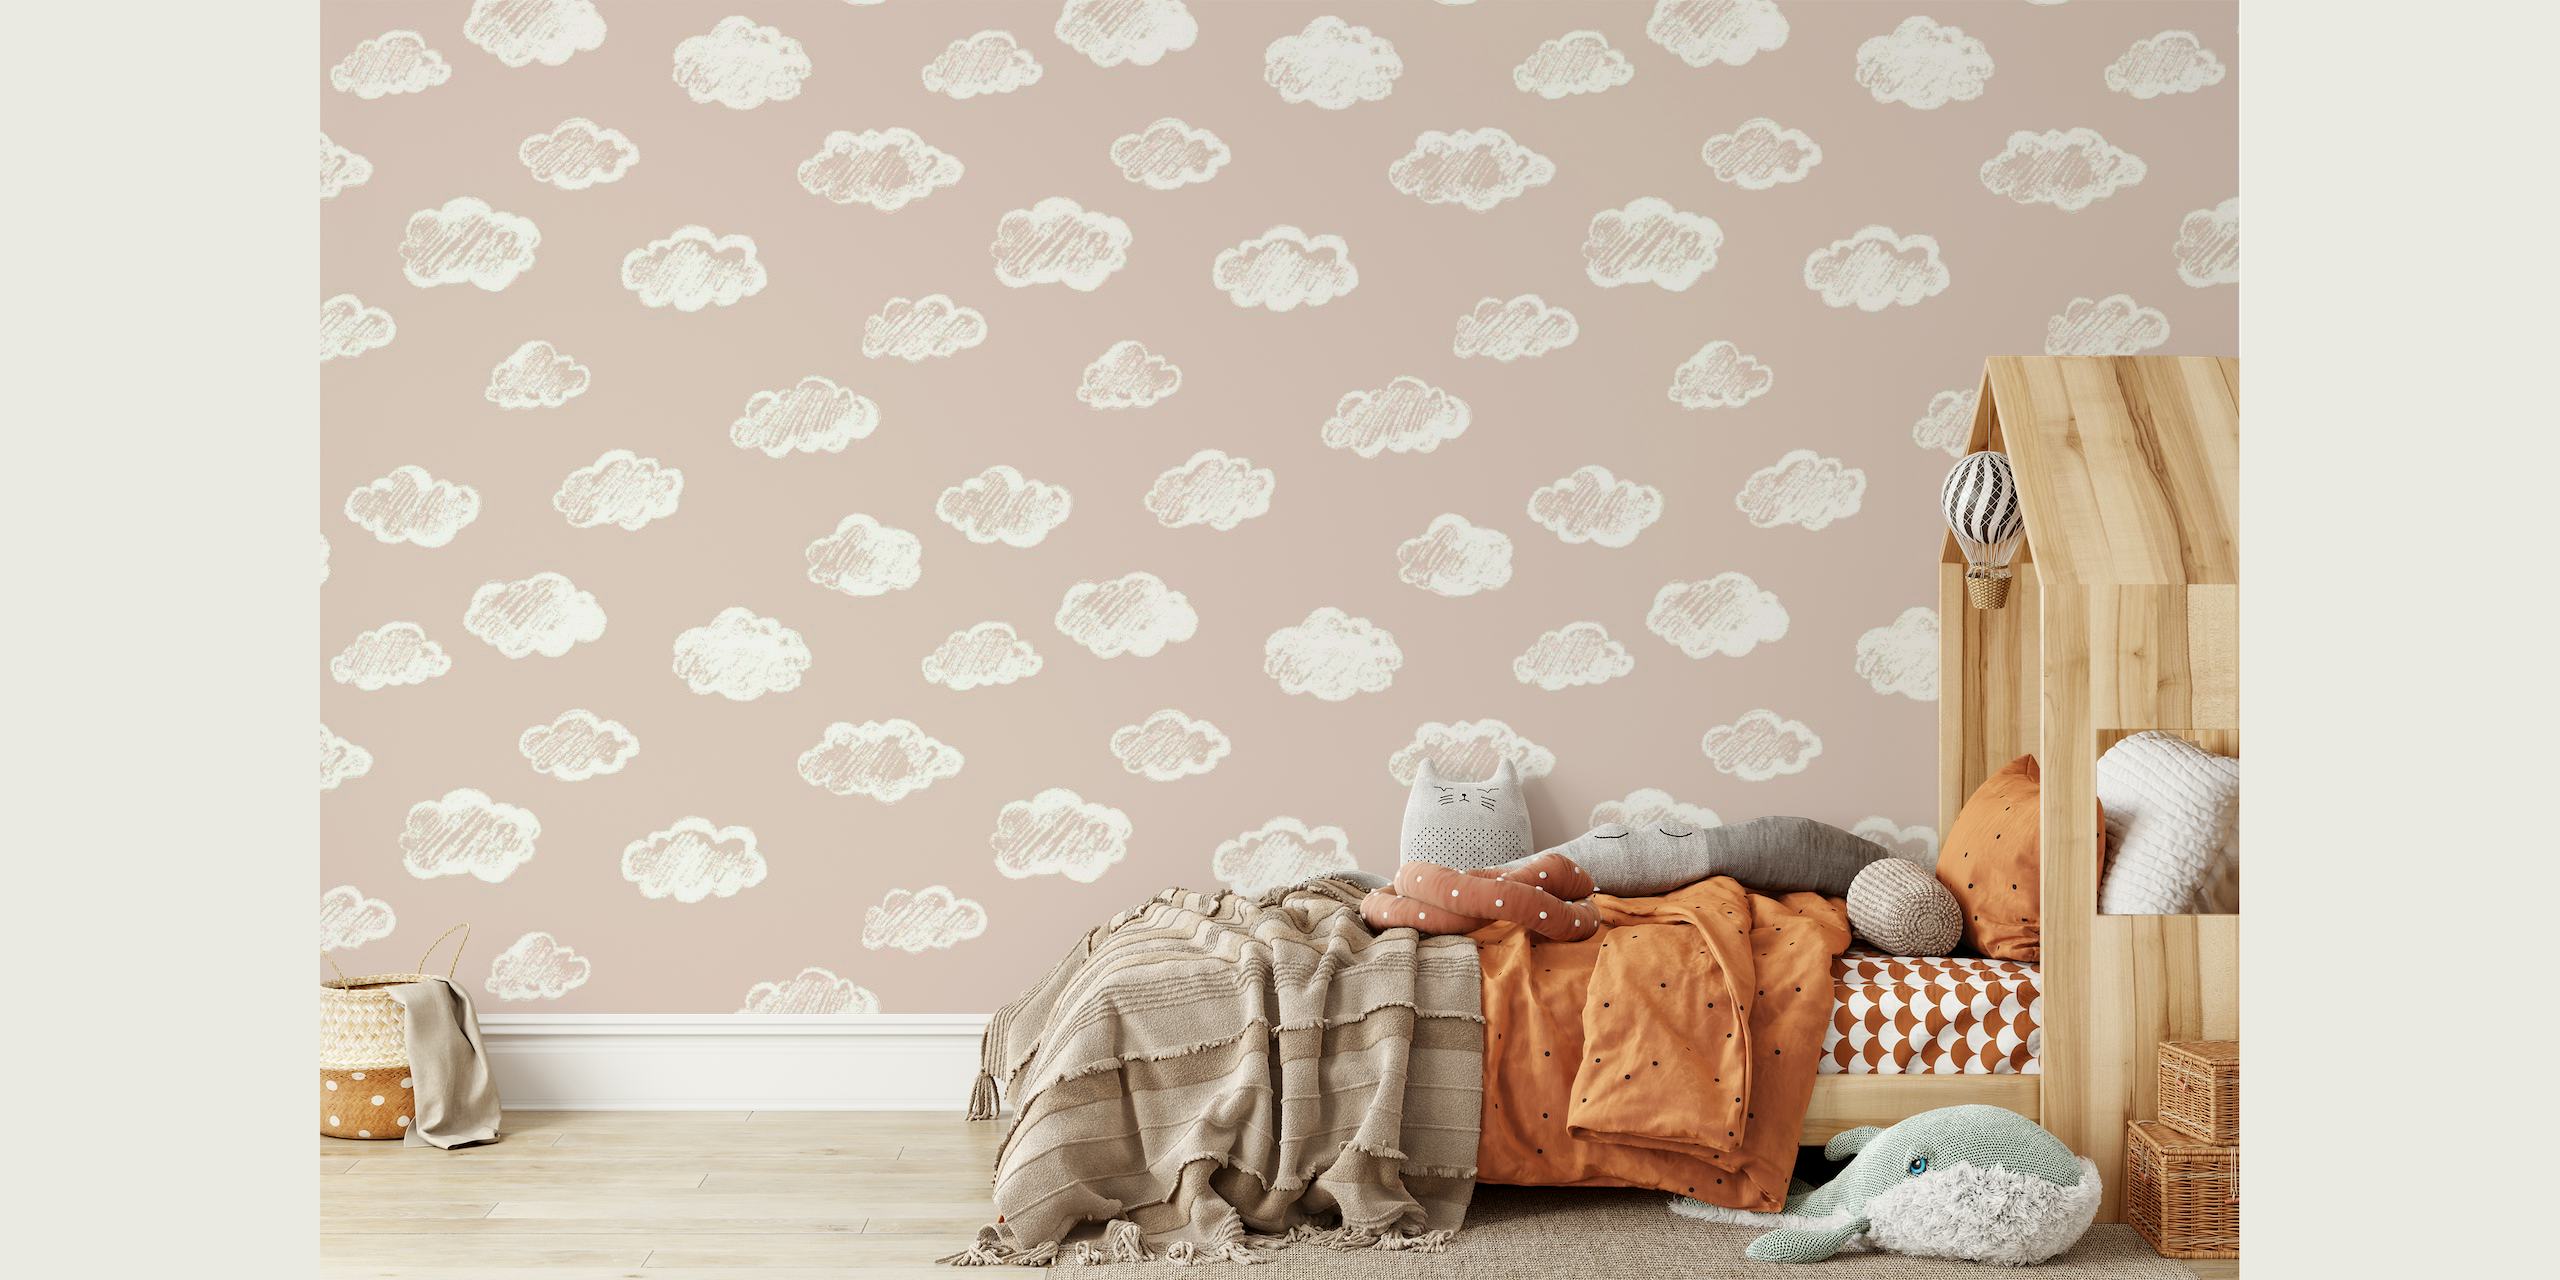 Soft white clouds pattern on blush pink background wall mural